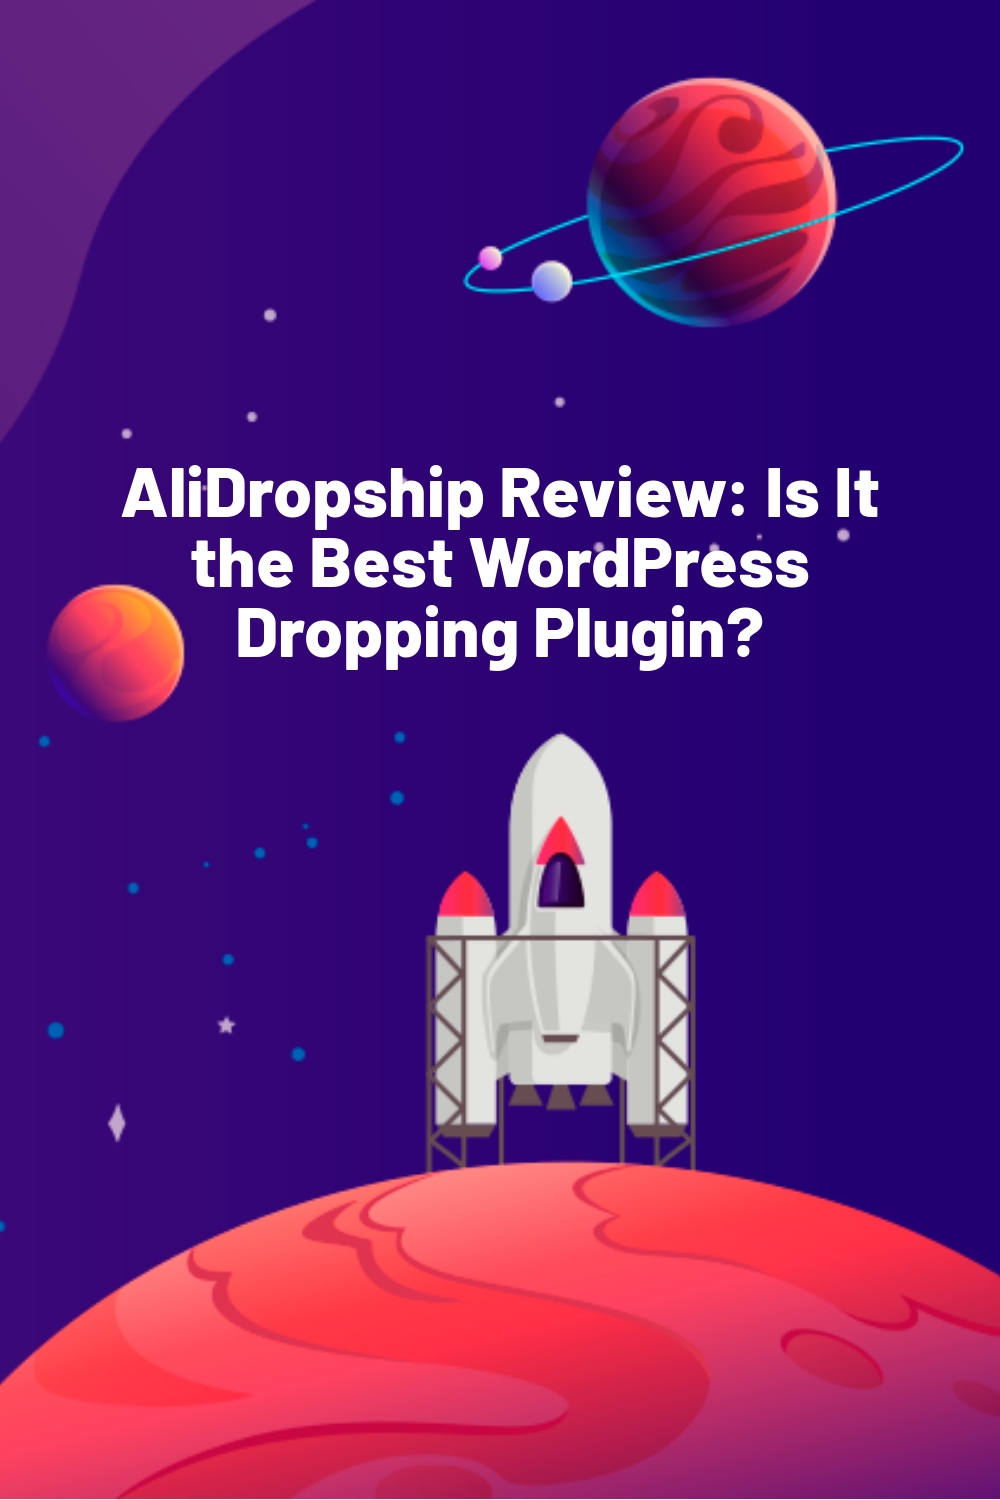 AliDropship Review: Is It the Best WordPress Dropping Plugin?